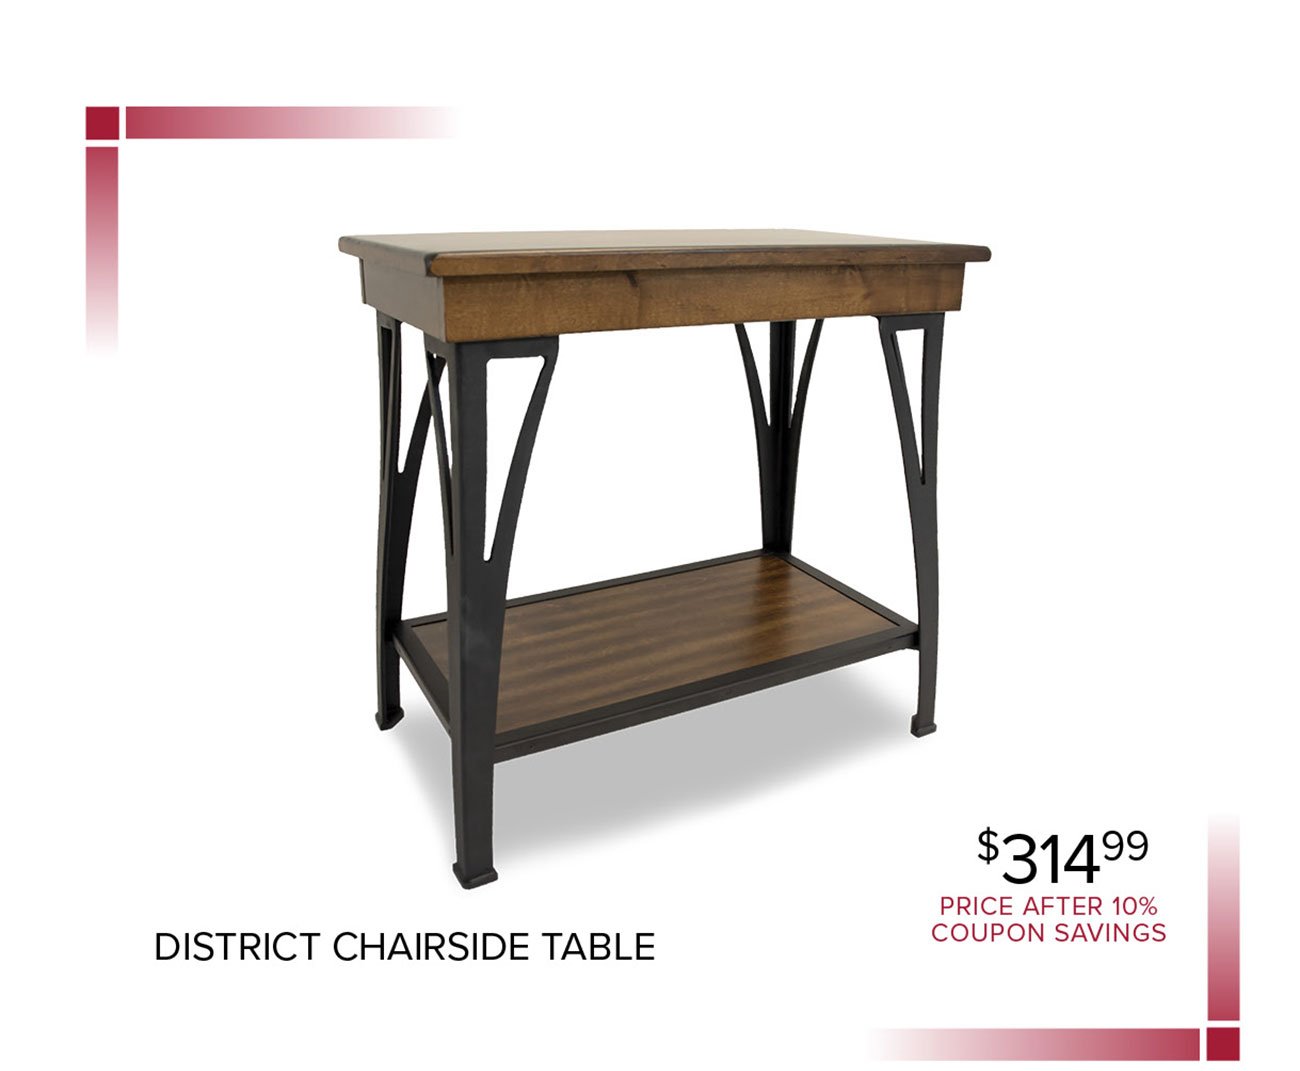 District-chairside-table